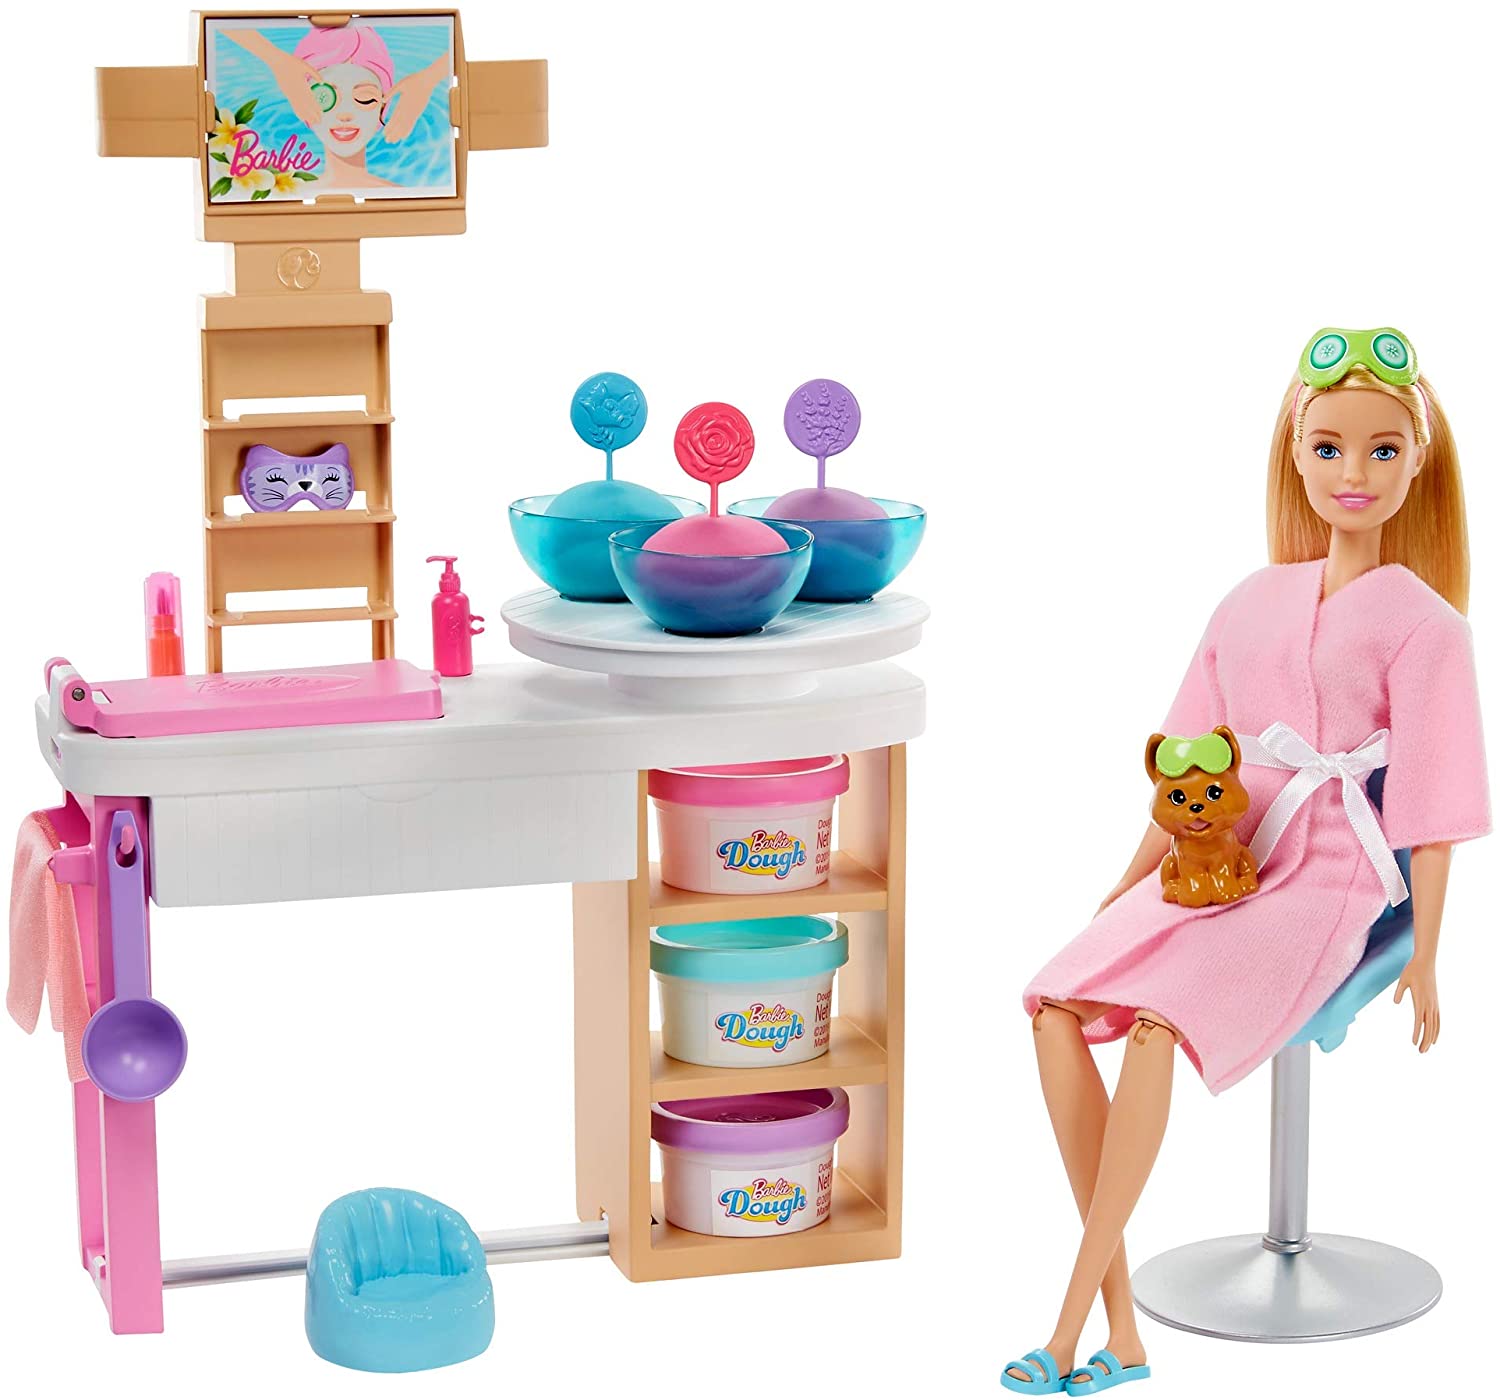 Barbie Face Mask Spa Day - a super cute spa playset with Barbie doll -  